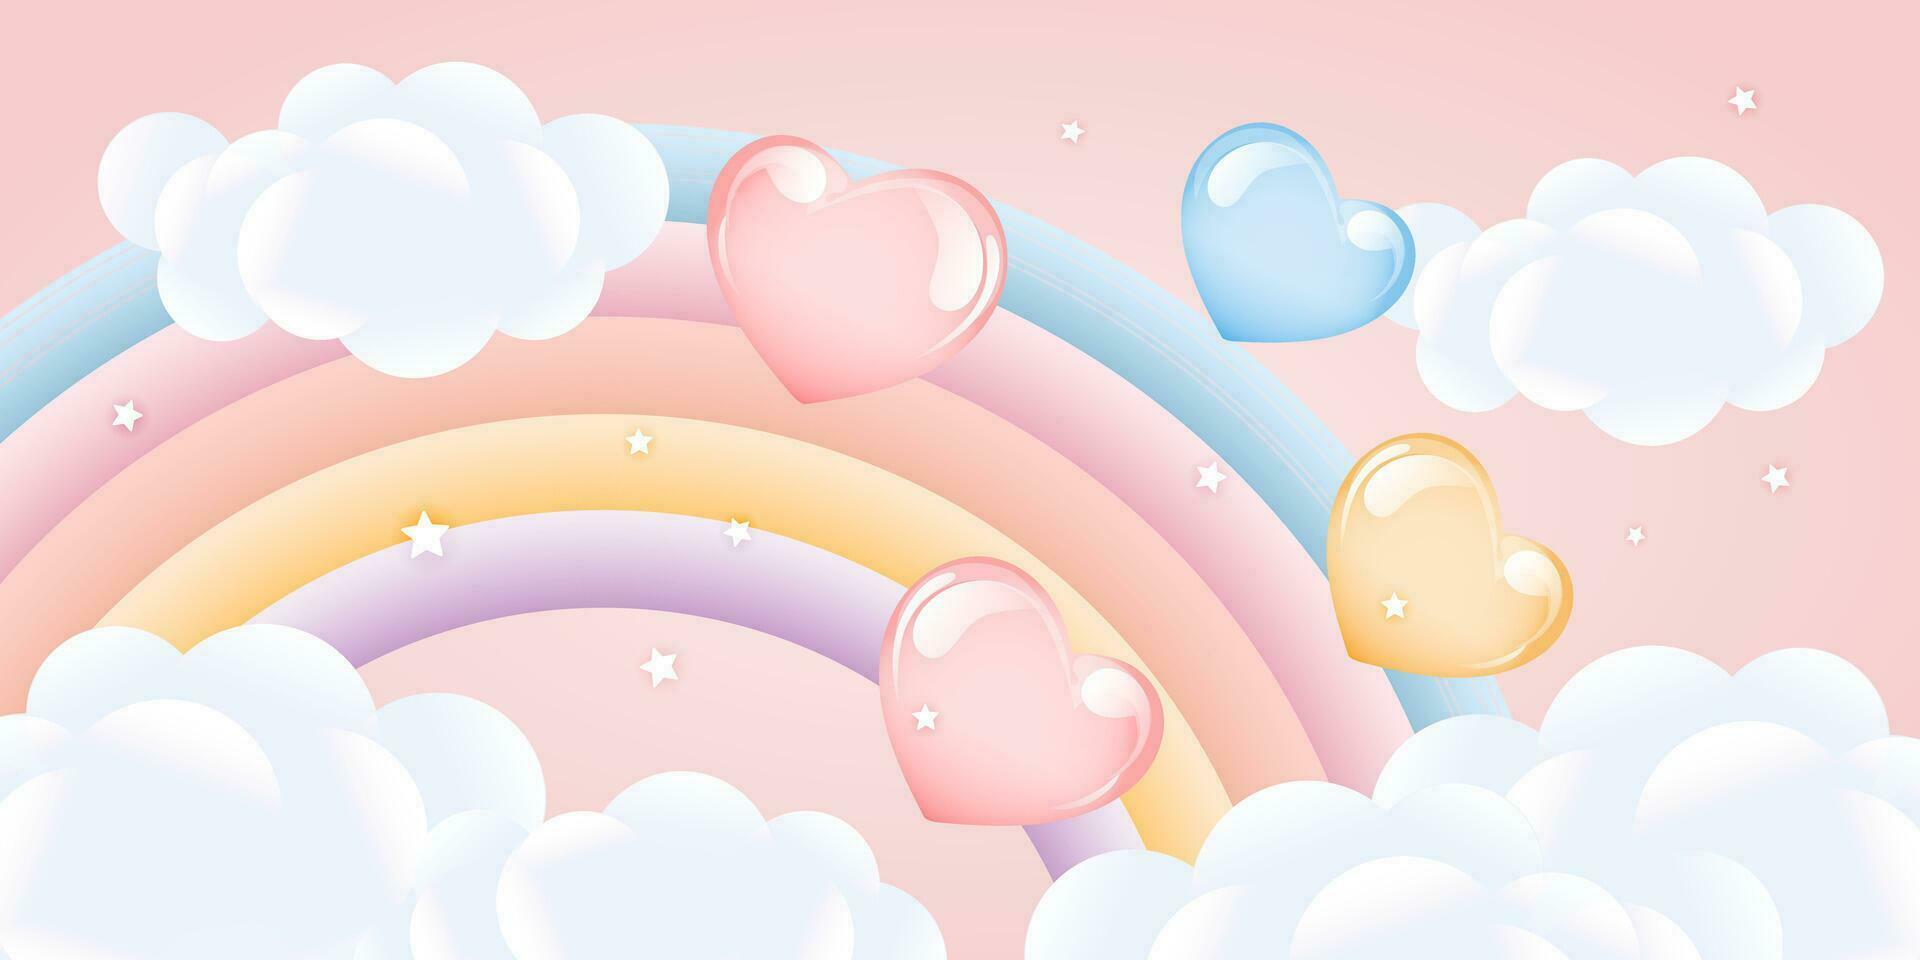 3d baby shower, rainbow with clouds and balloons on the starry sky, children's design in pastel colors. Background, illustration, vector. vector